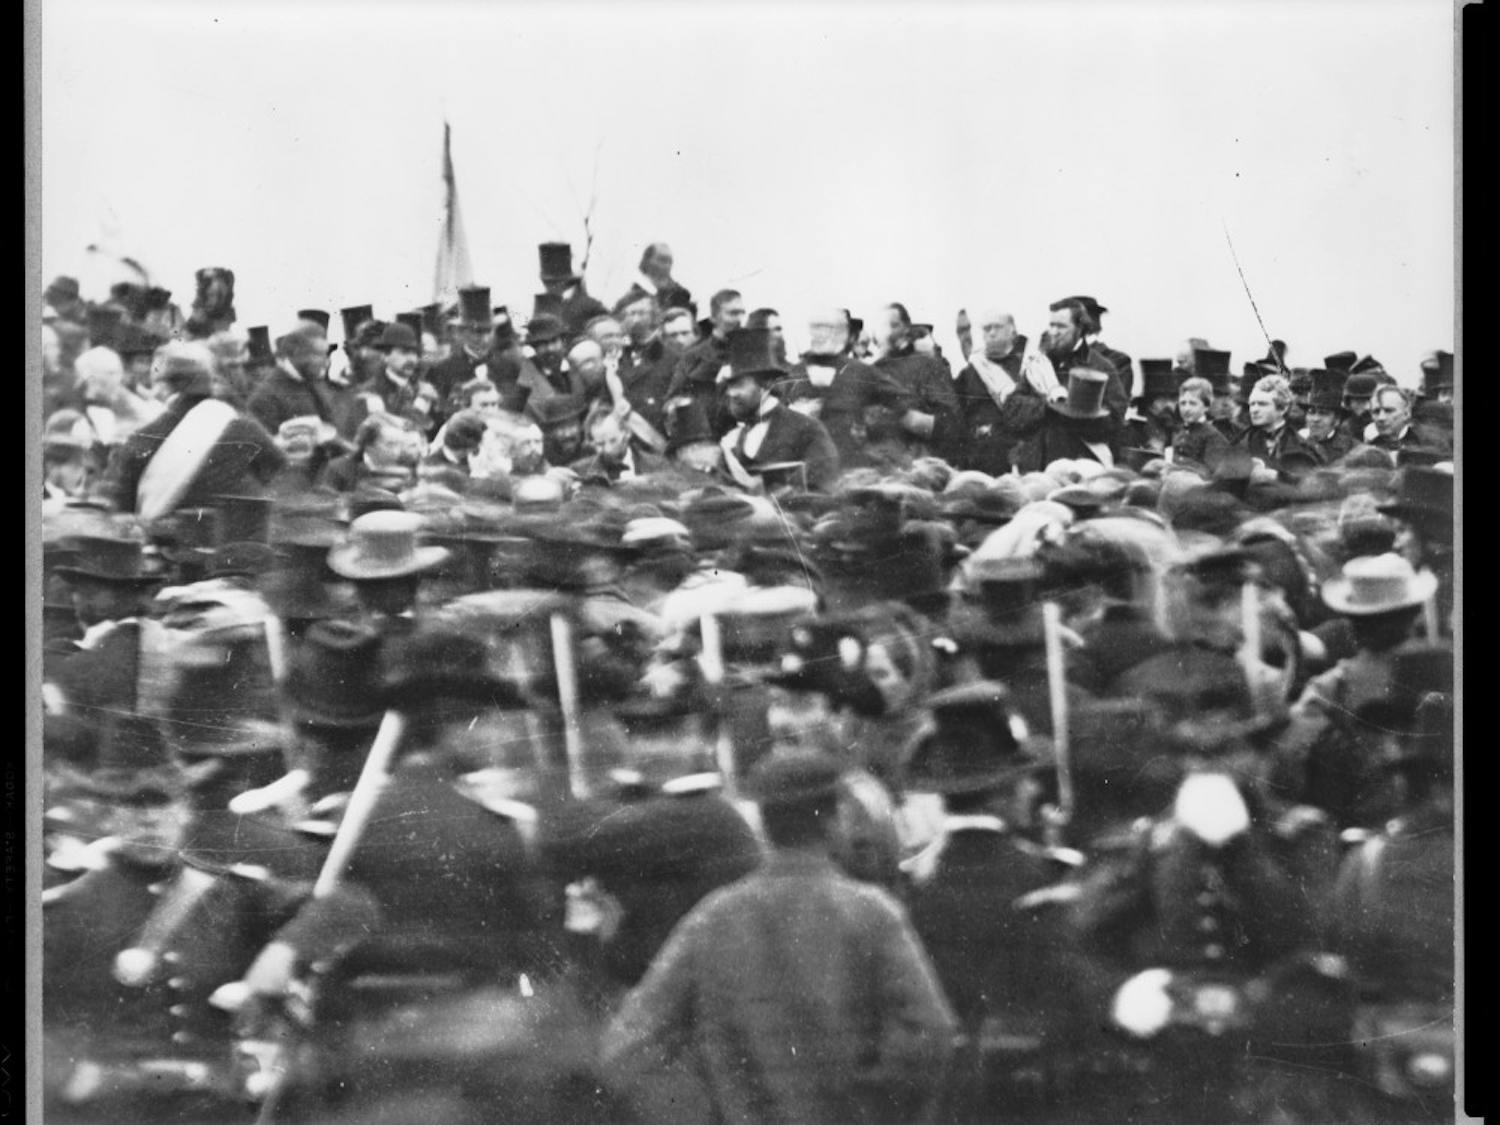  One of the only photographs of Lincoln at Gettysburg. Photo courtesy Wikimedia Commons.